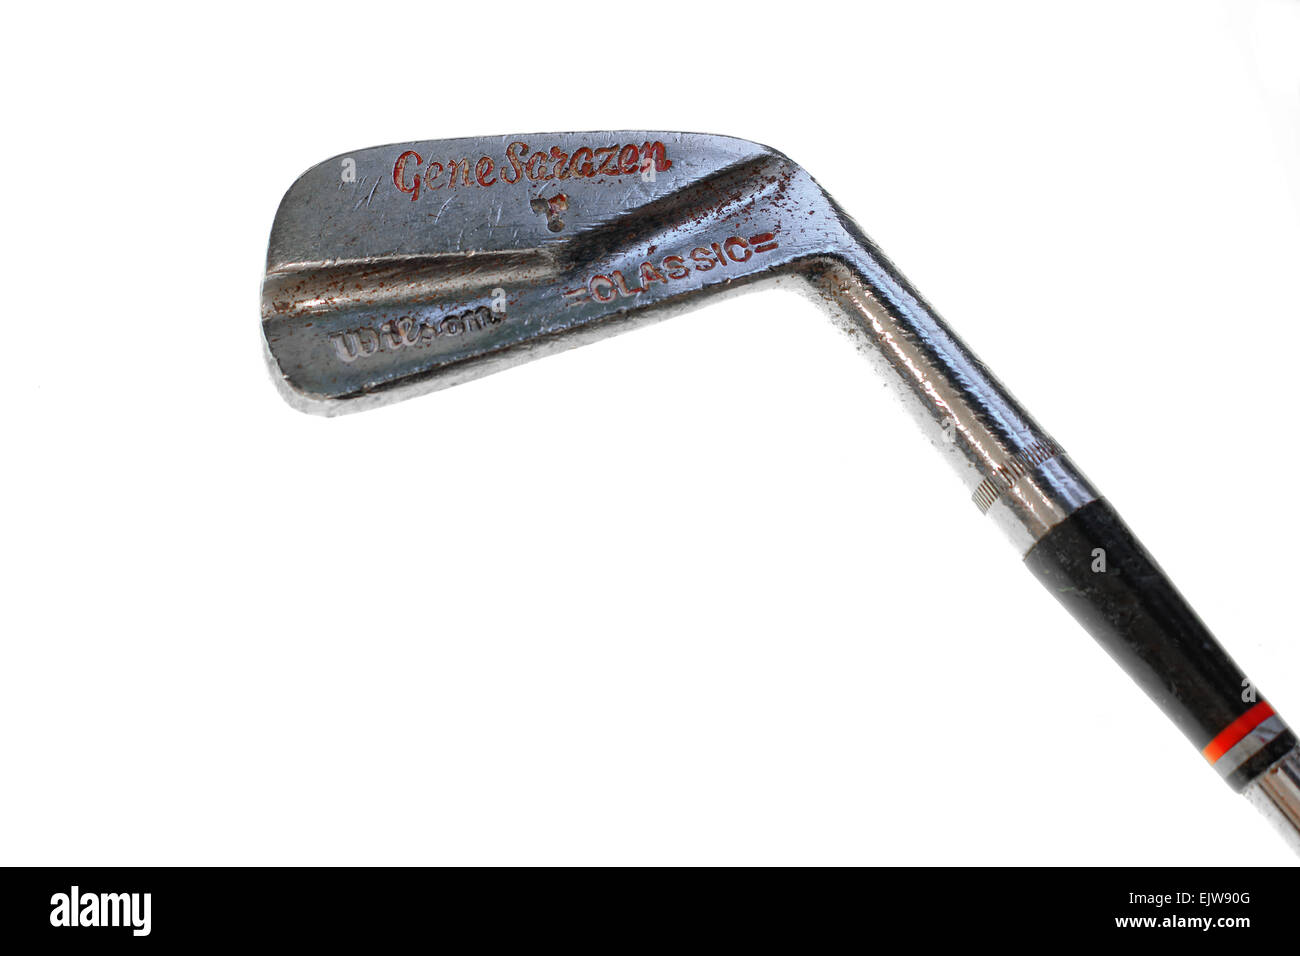 Wilson Classic Gene Sarazen vintage perimeter weighted golf iron, made in 1930s. Isolated by light on white background Stock Photo